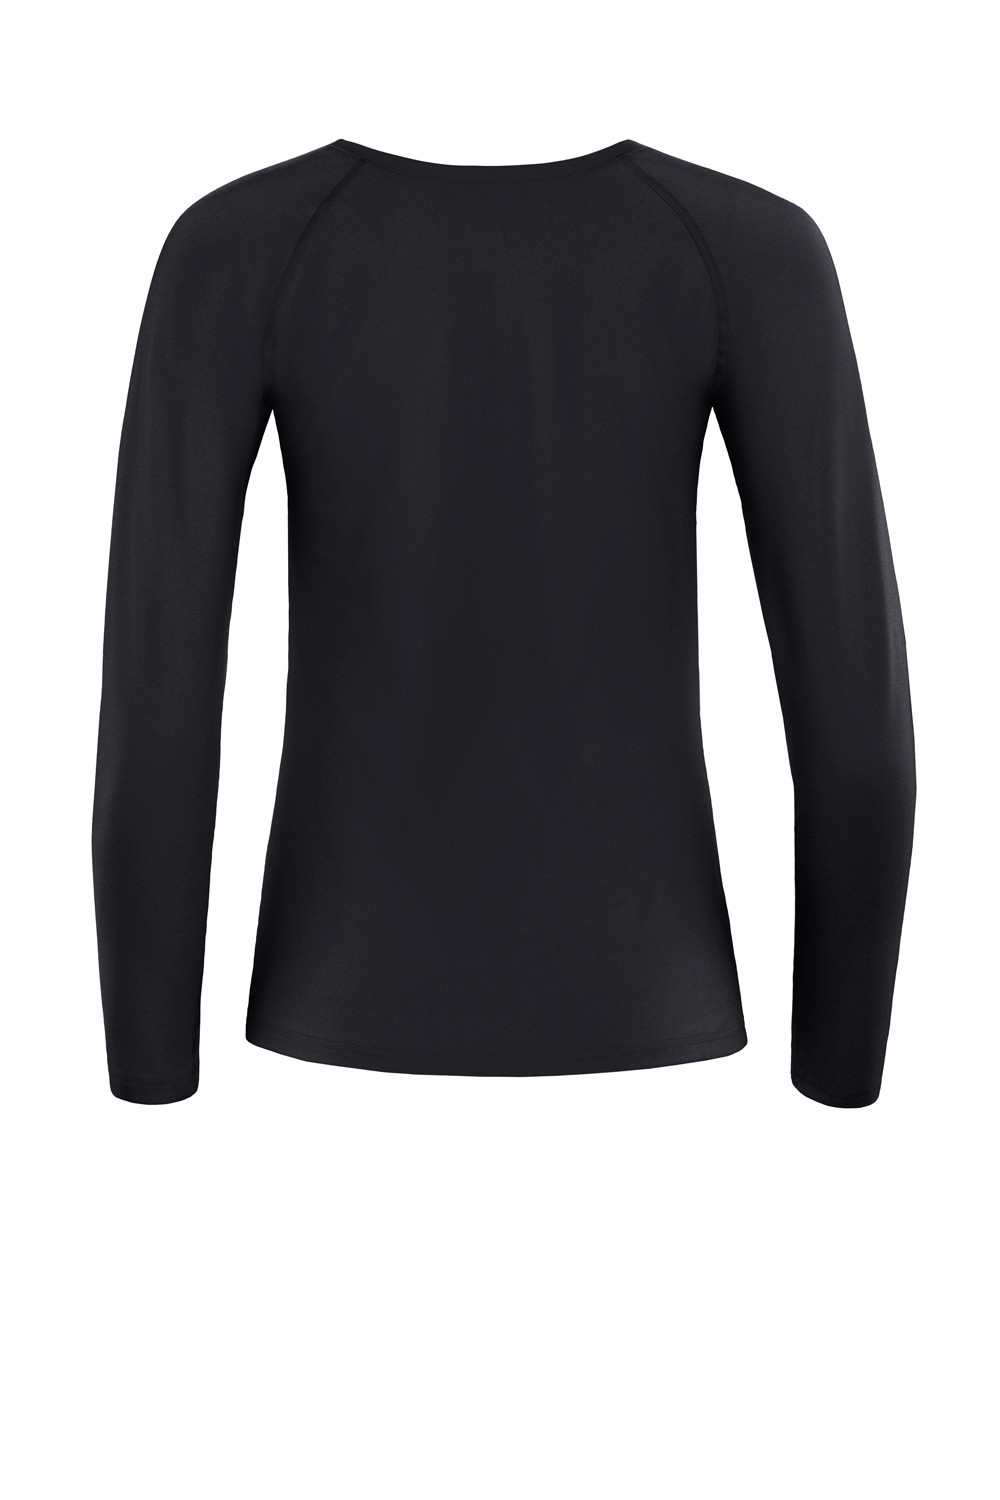 Top Winshape Ultra Style Soft Functional Sleeve and Soft schwarz, Light Long AET118LS,